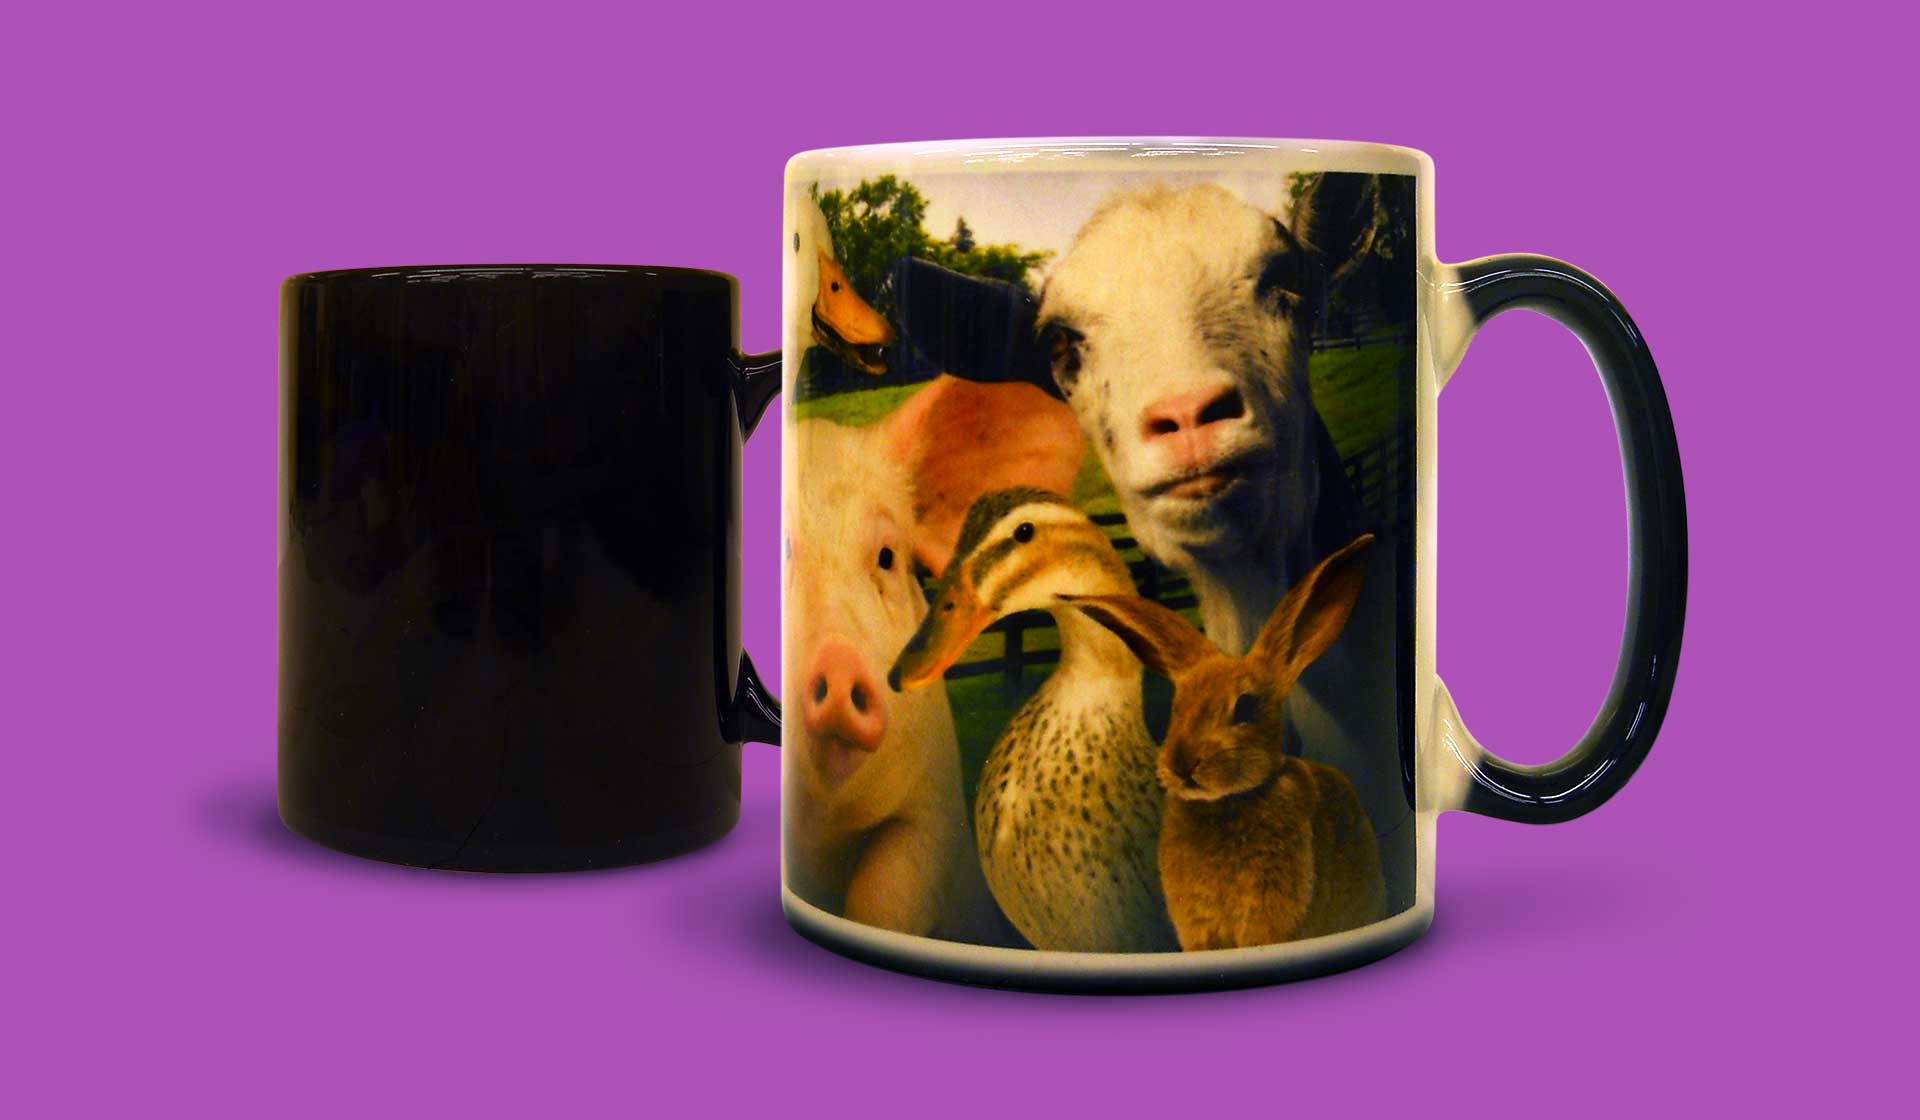 WOW Mugs from Prince William Pottery